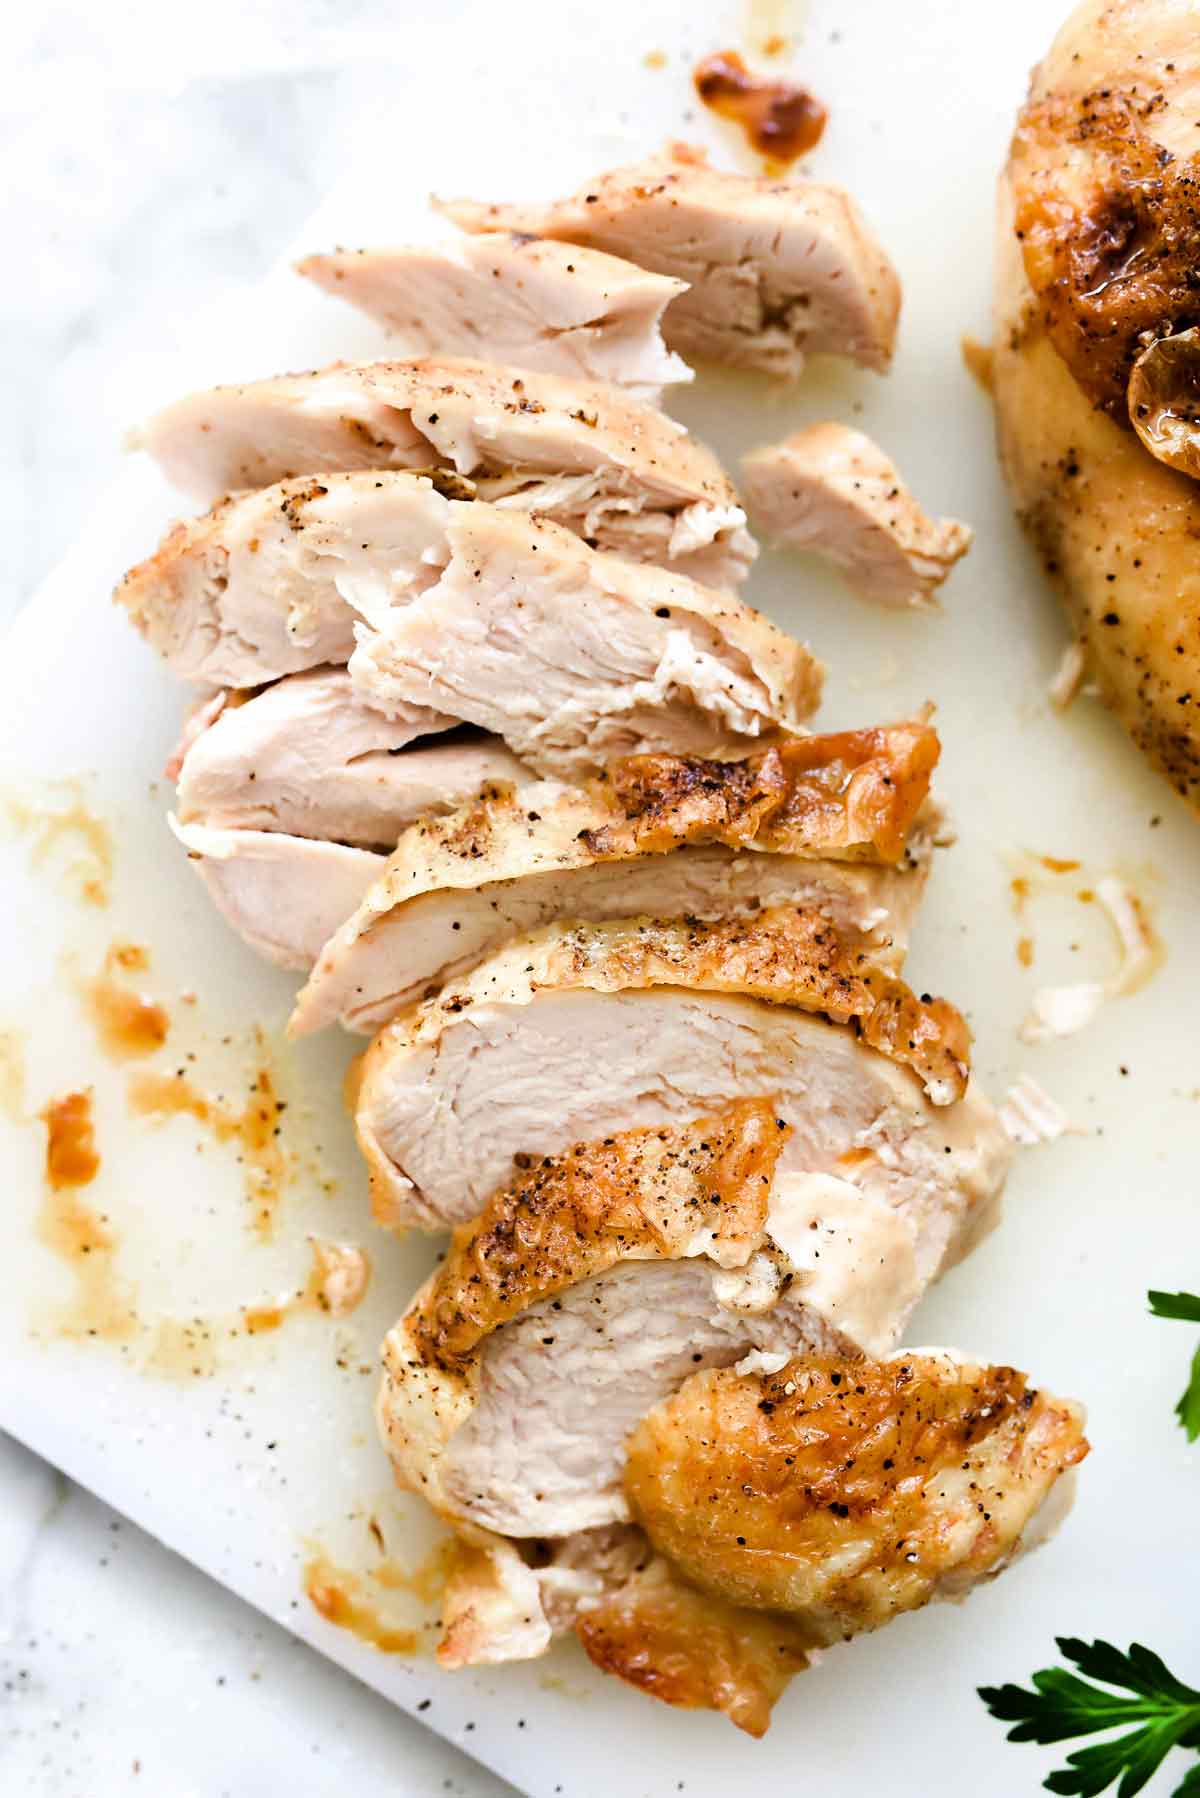 The Best Baked Chicken Breast Recipe (So Juicy!) | foodiecrush.com